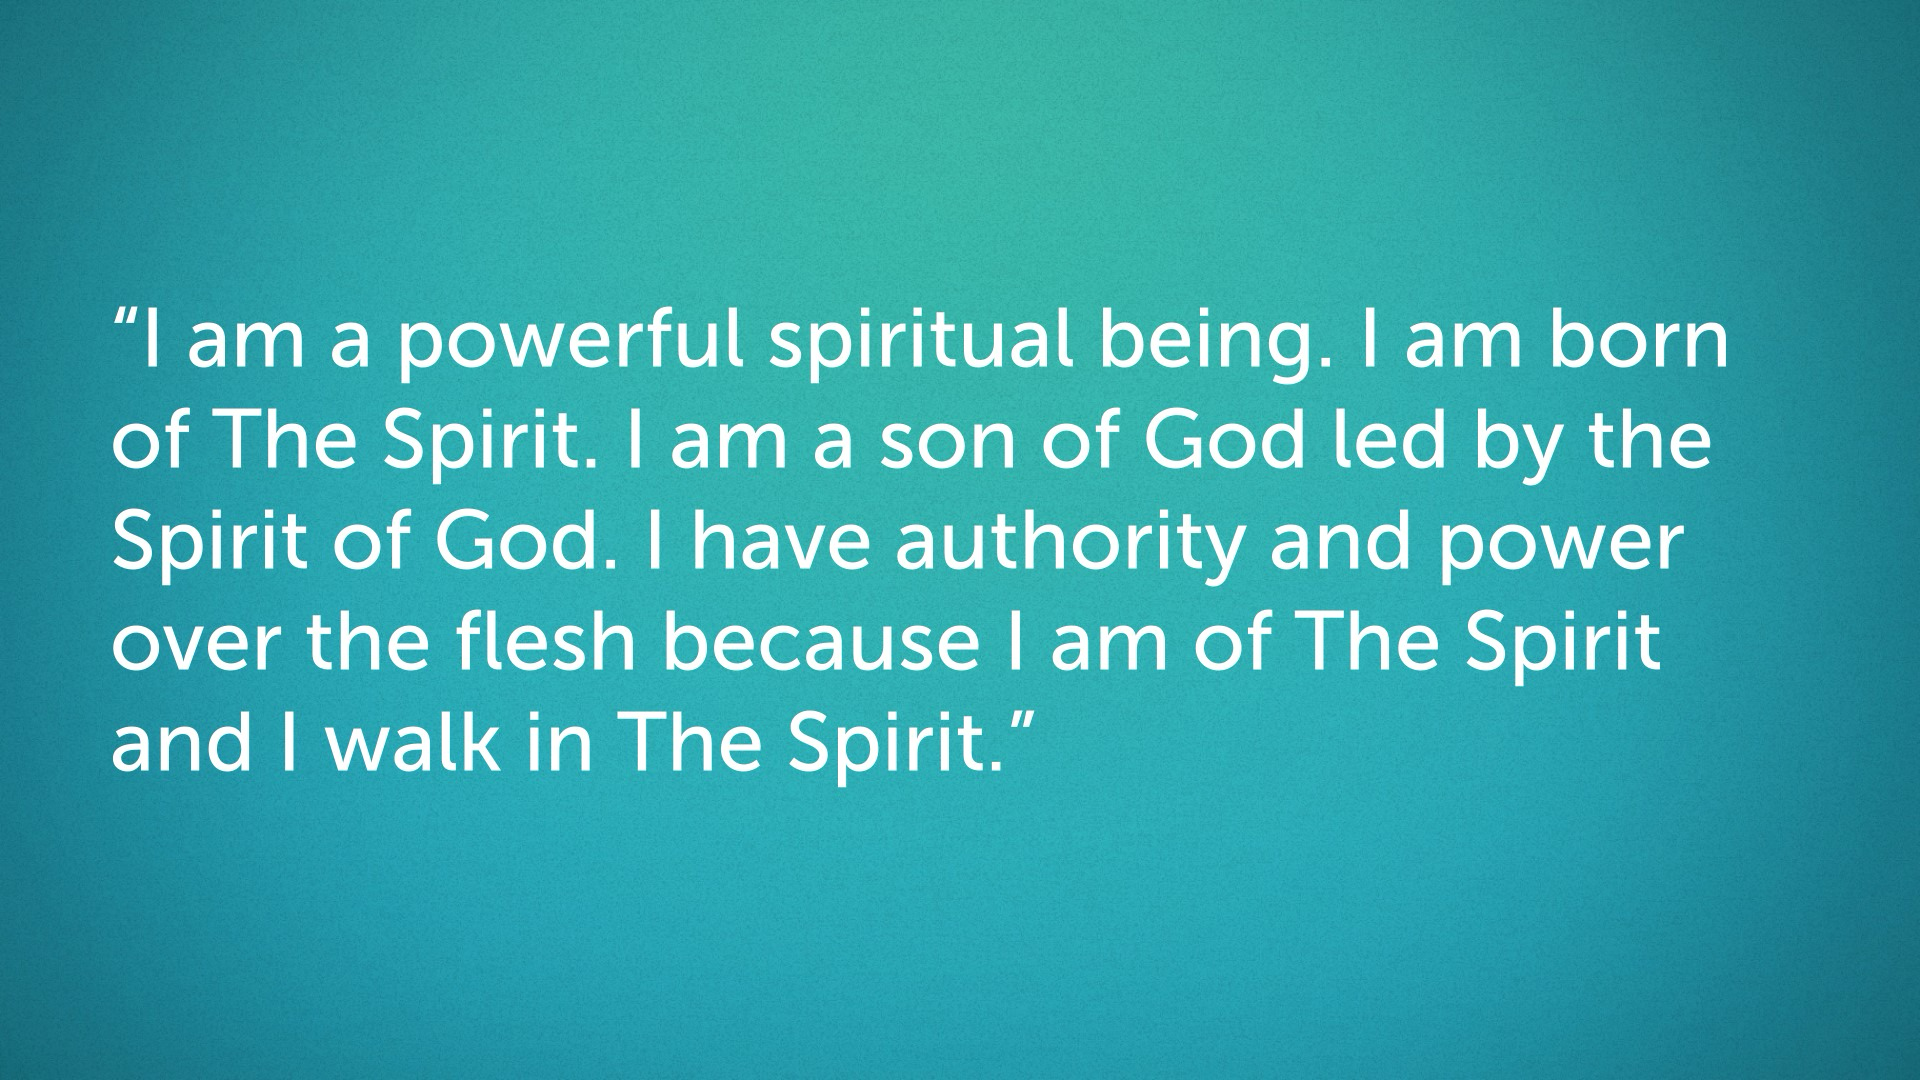 SJF - Daily Worship, Word and Spirit - Oct. 4, 2023